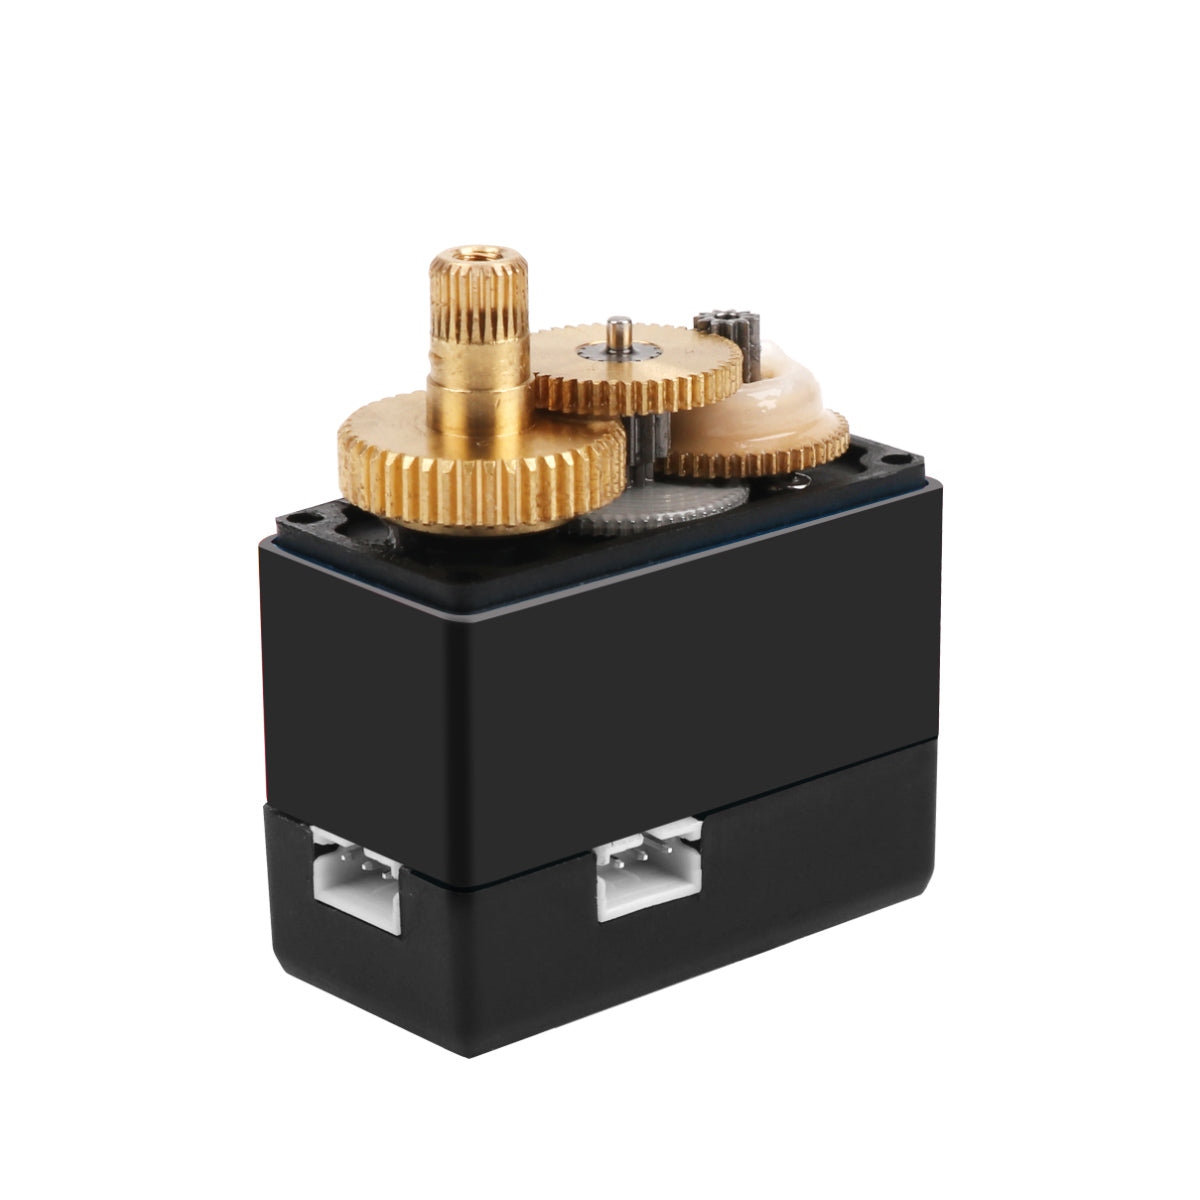 Hiwonder HTS-20H Serial Bus High Voltage Servo with 20KG Torque and Data Feedback Function